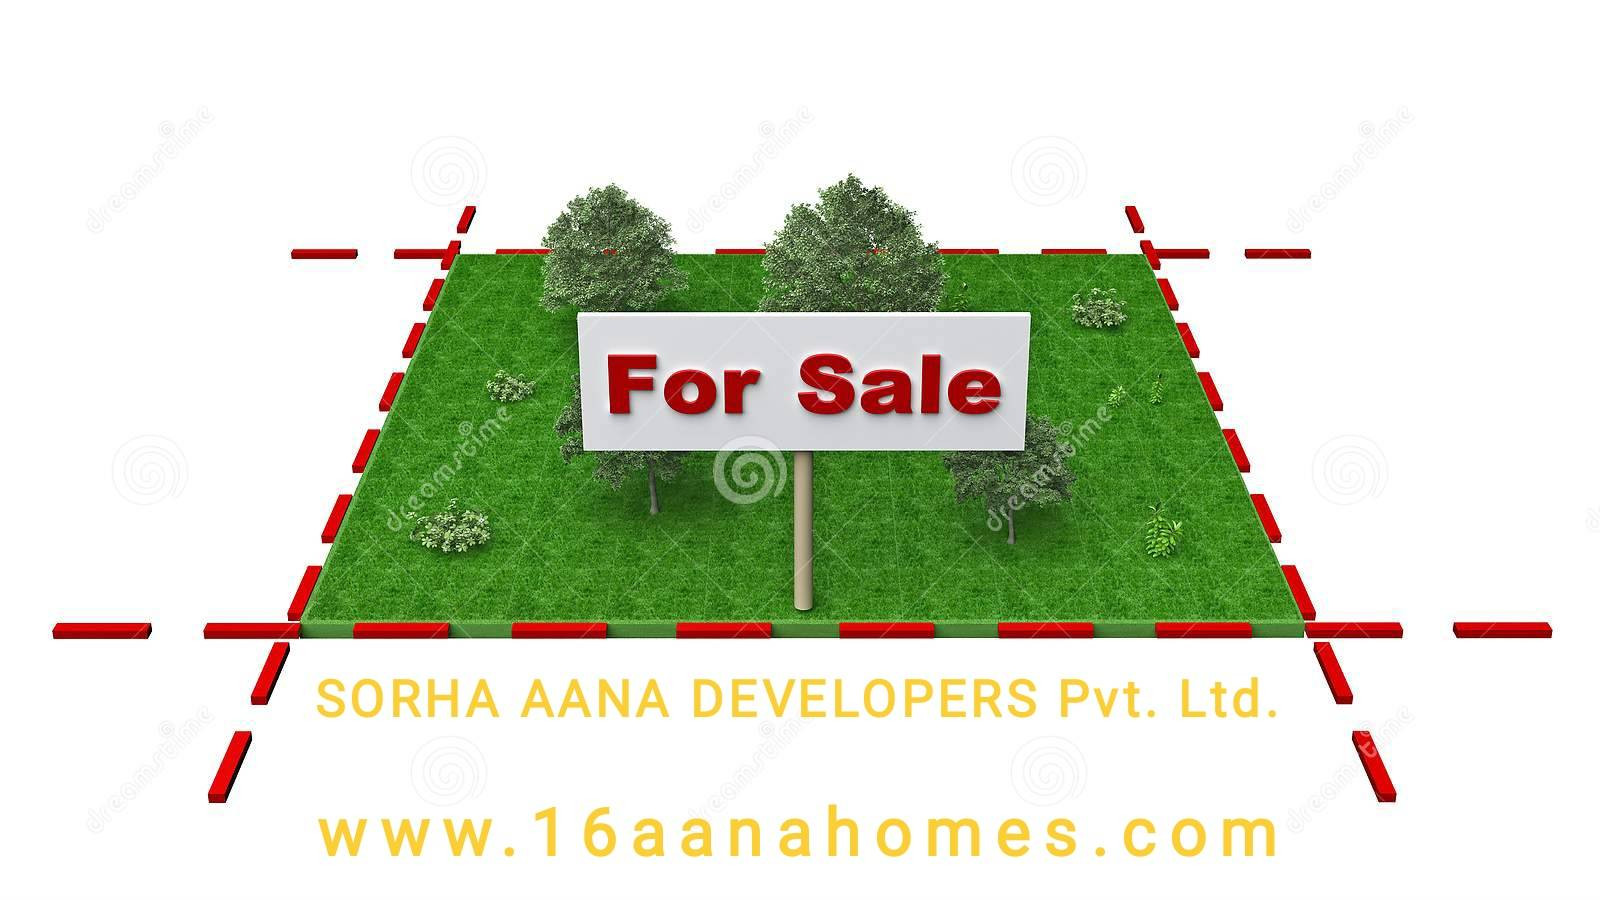 thumbnail of Land For Sale in Pokhara